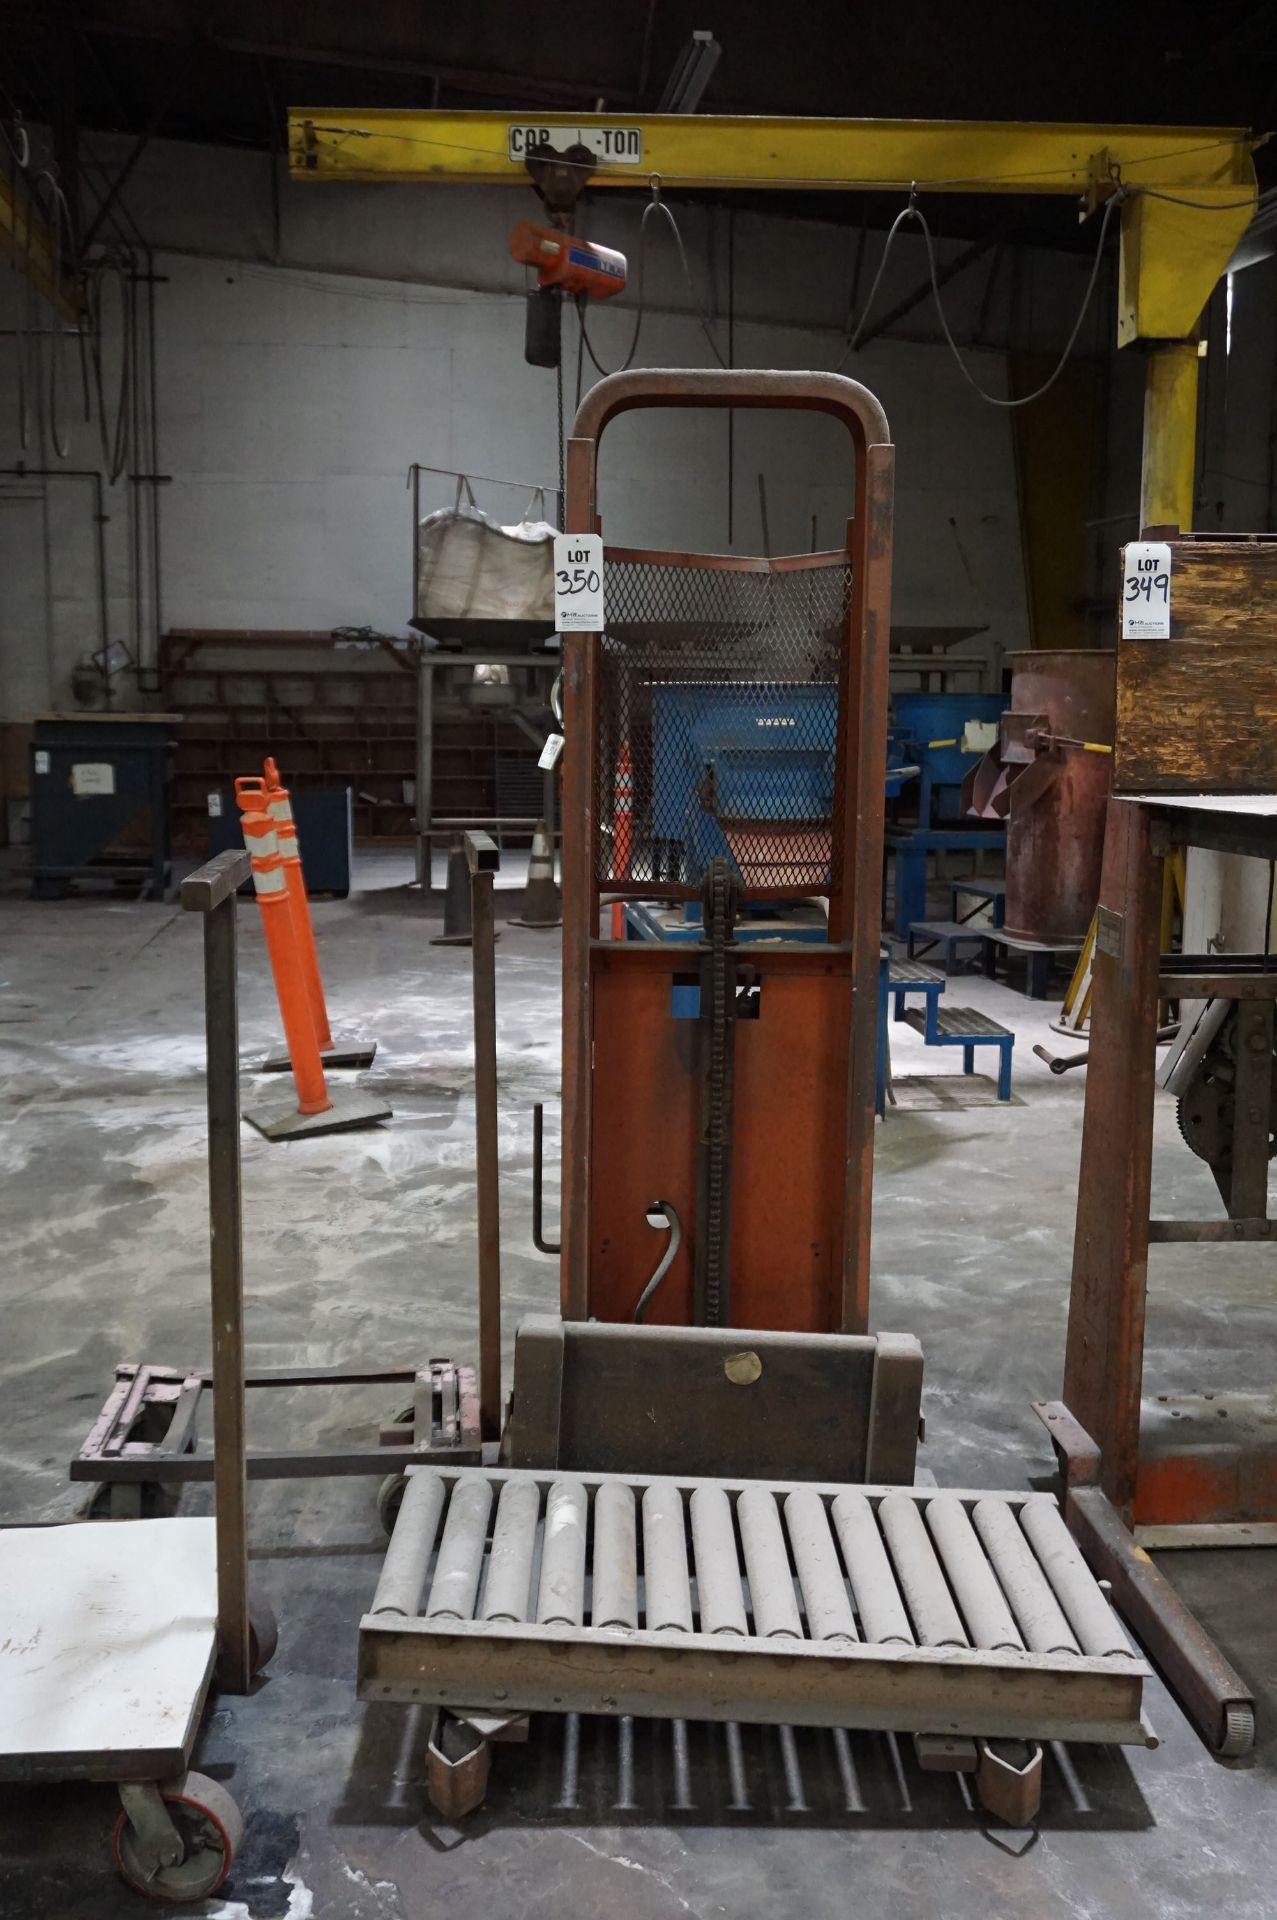 PRESTO WALK BEHIND HYDRAULIC STACKER LIFT **Rigging provided exclusively by Golden Bear Services.